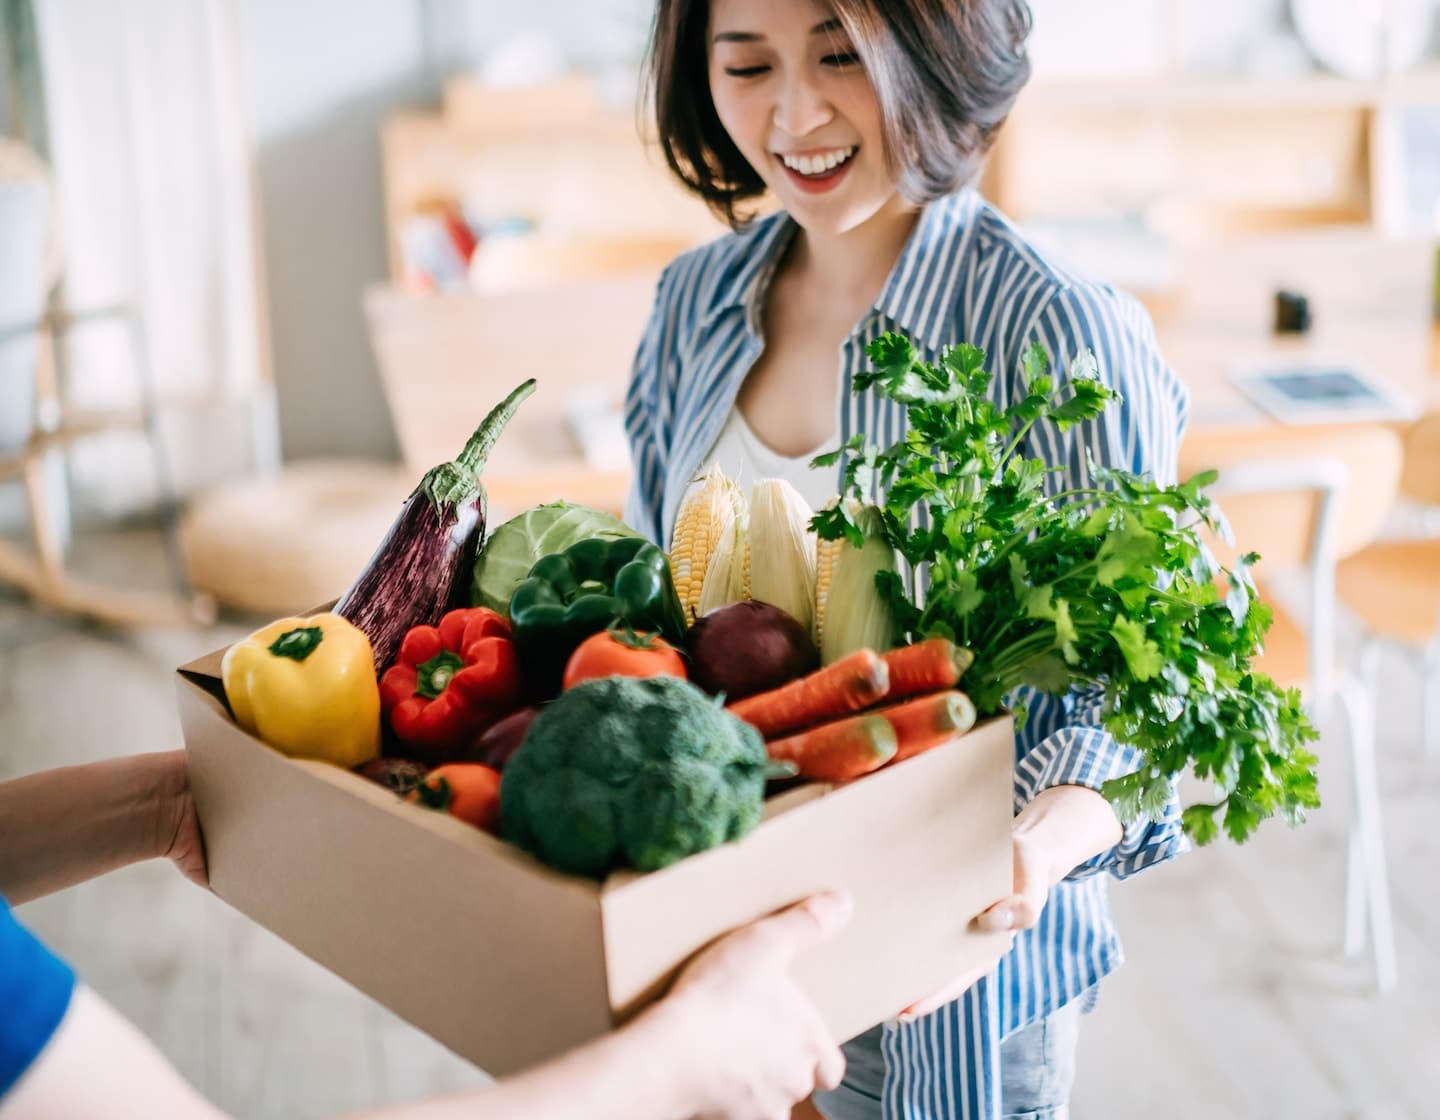 online grocery delivery singapore